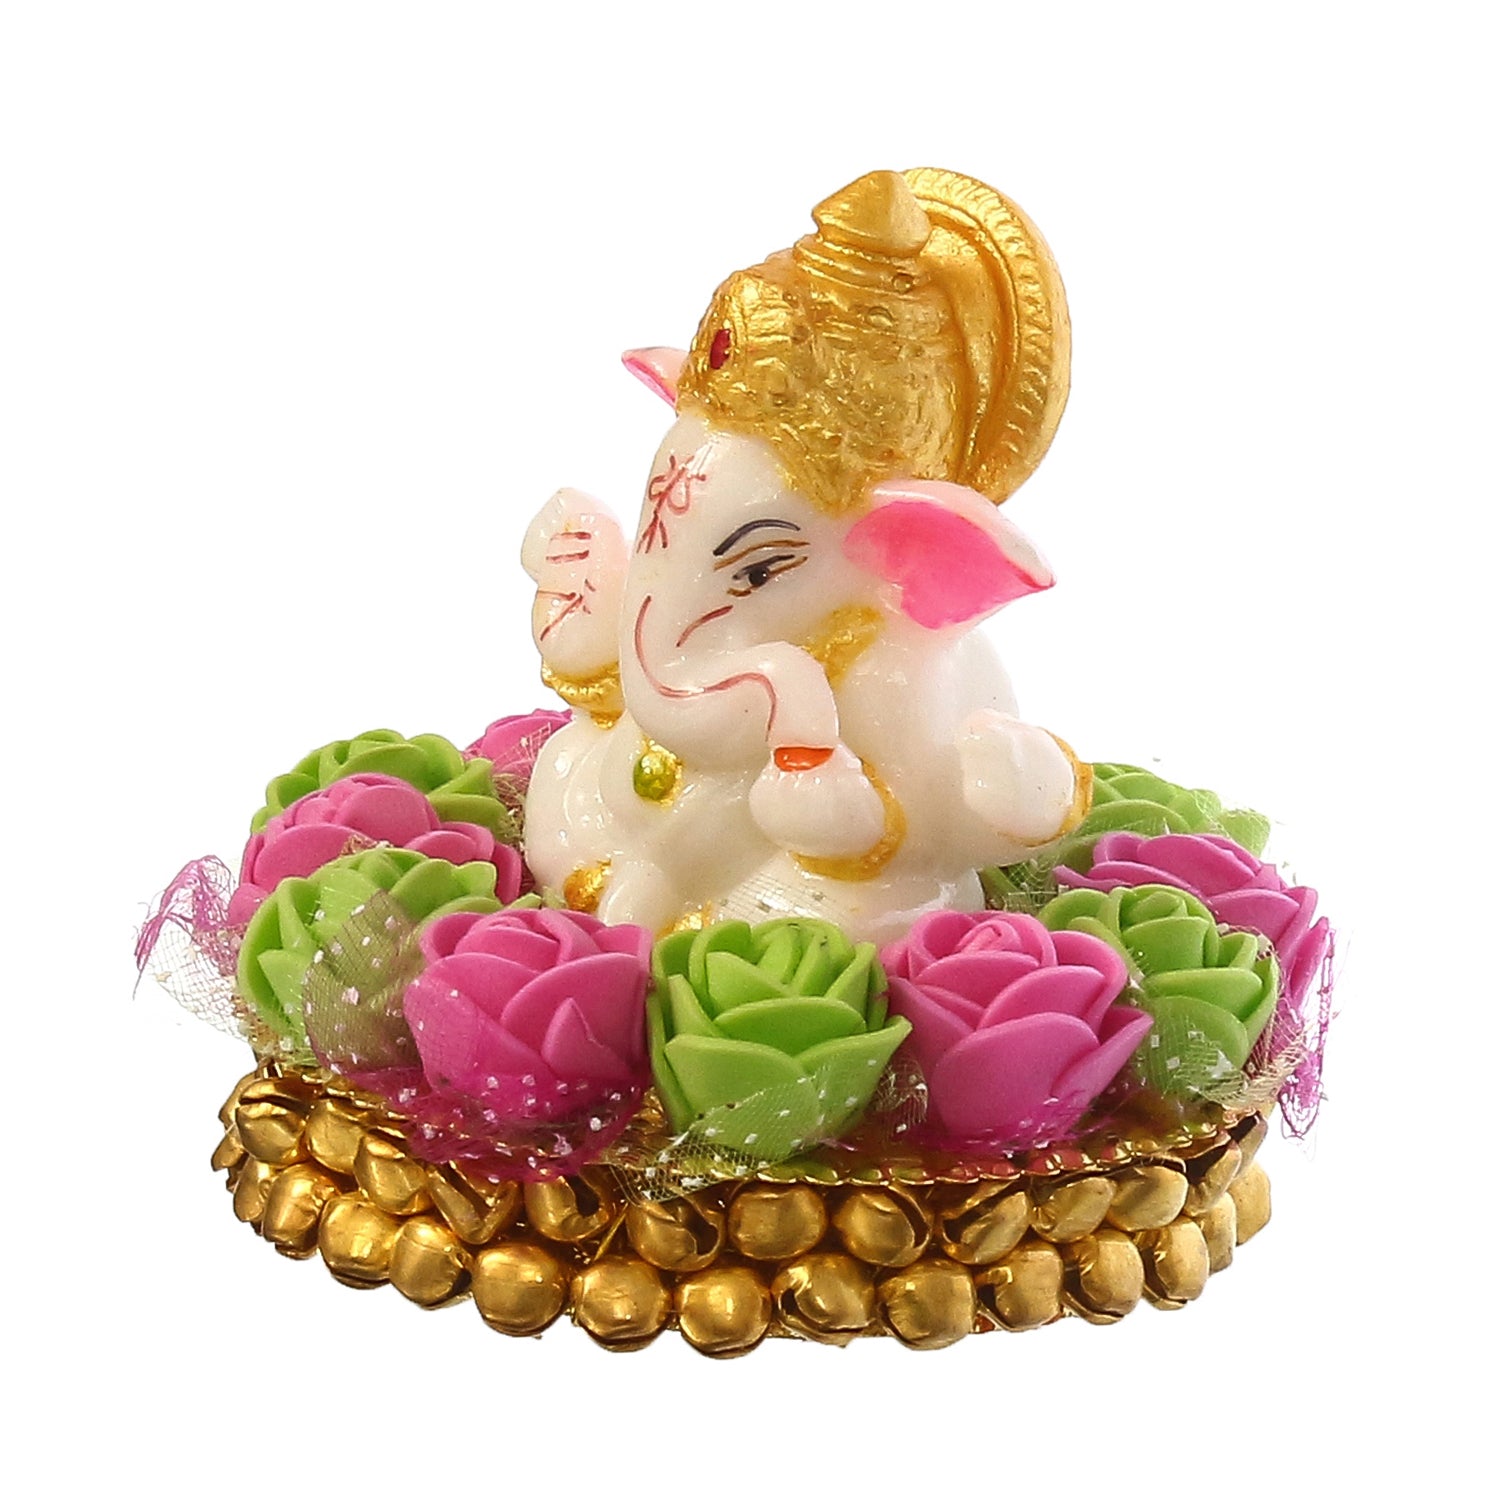 Golden and White Polyresin Lord Ganesha Idol on Decorative Pink and Green Flowers Plate 5